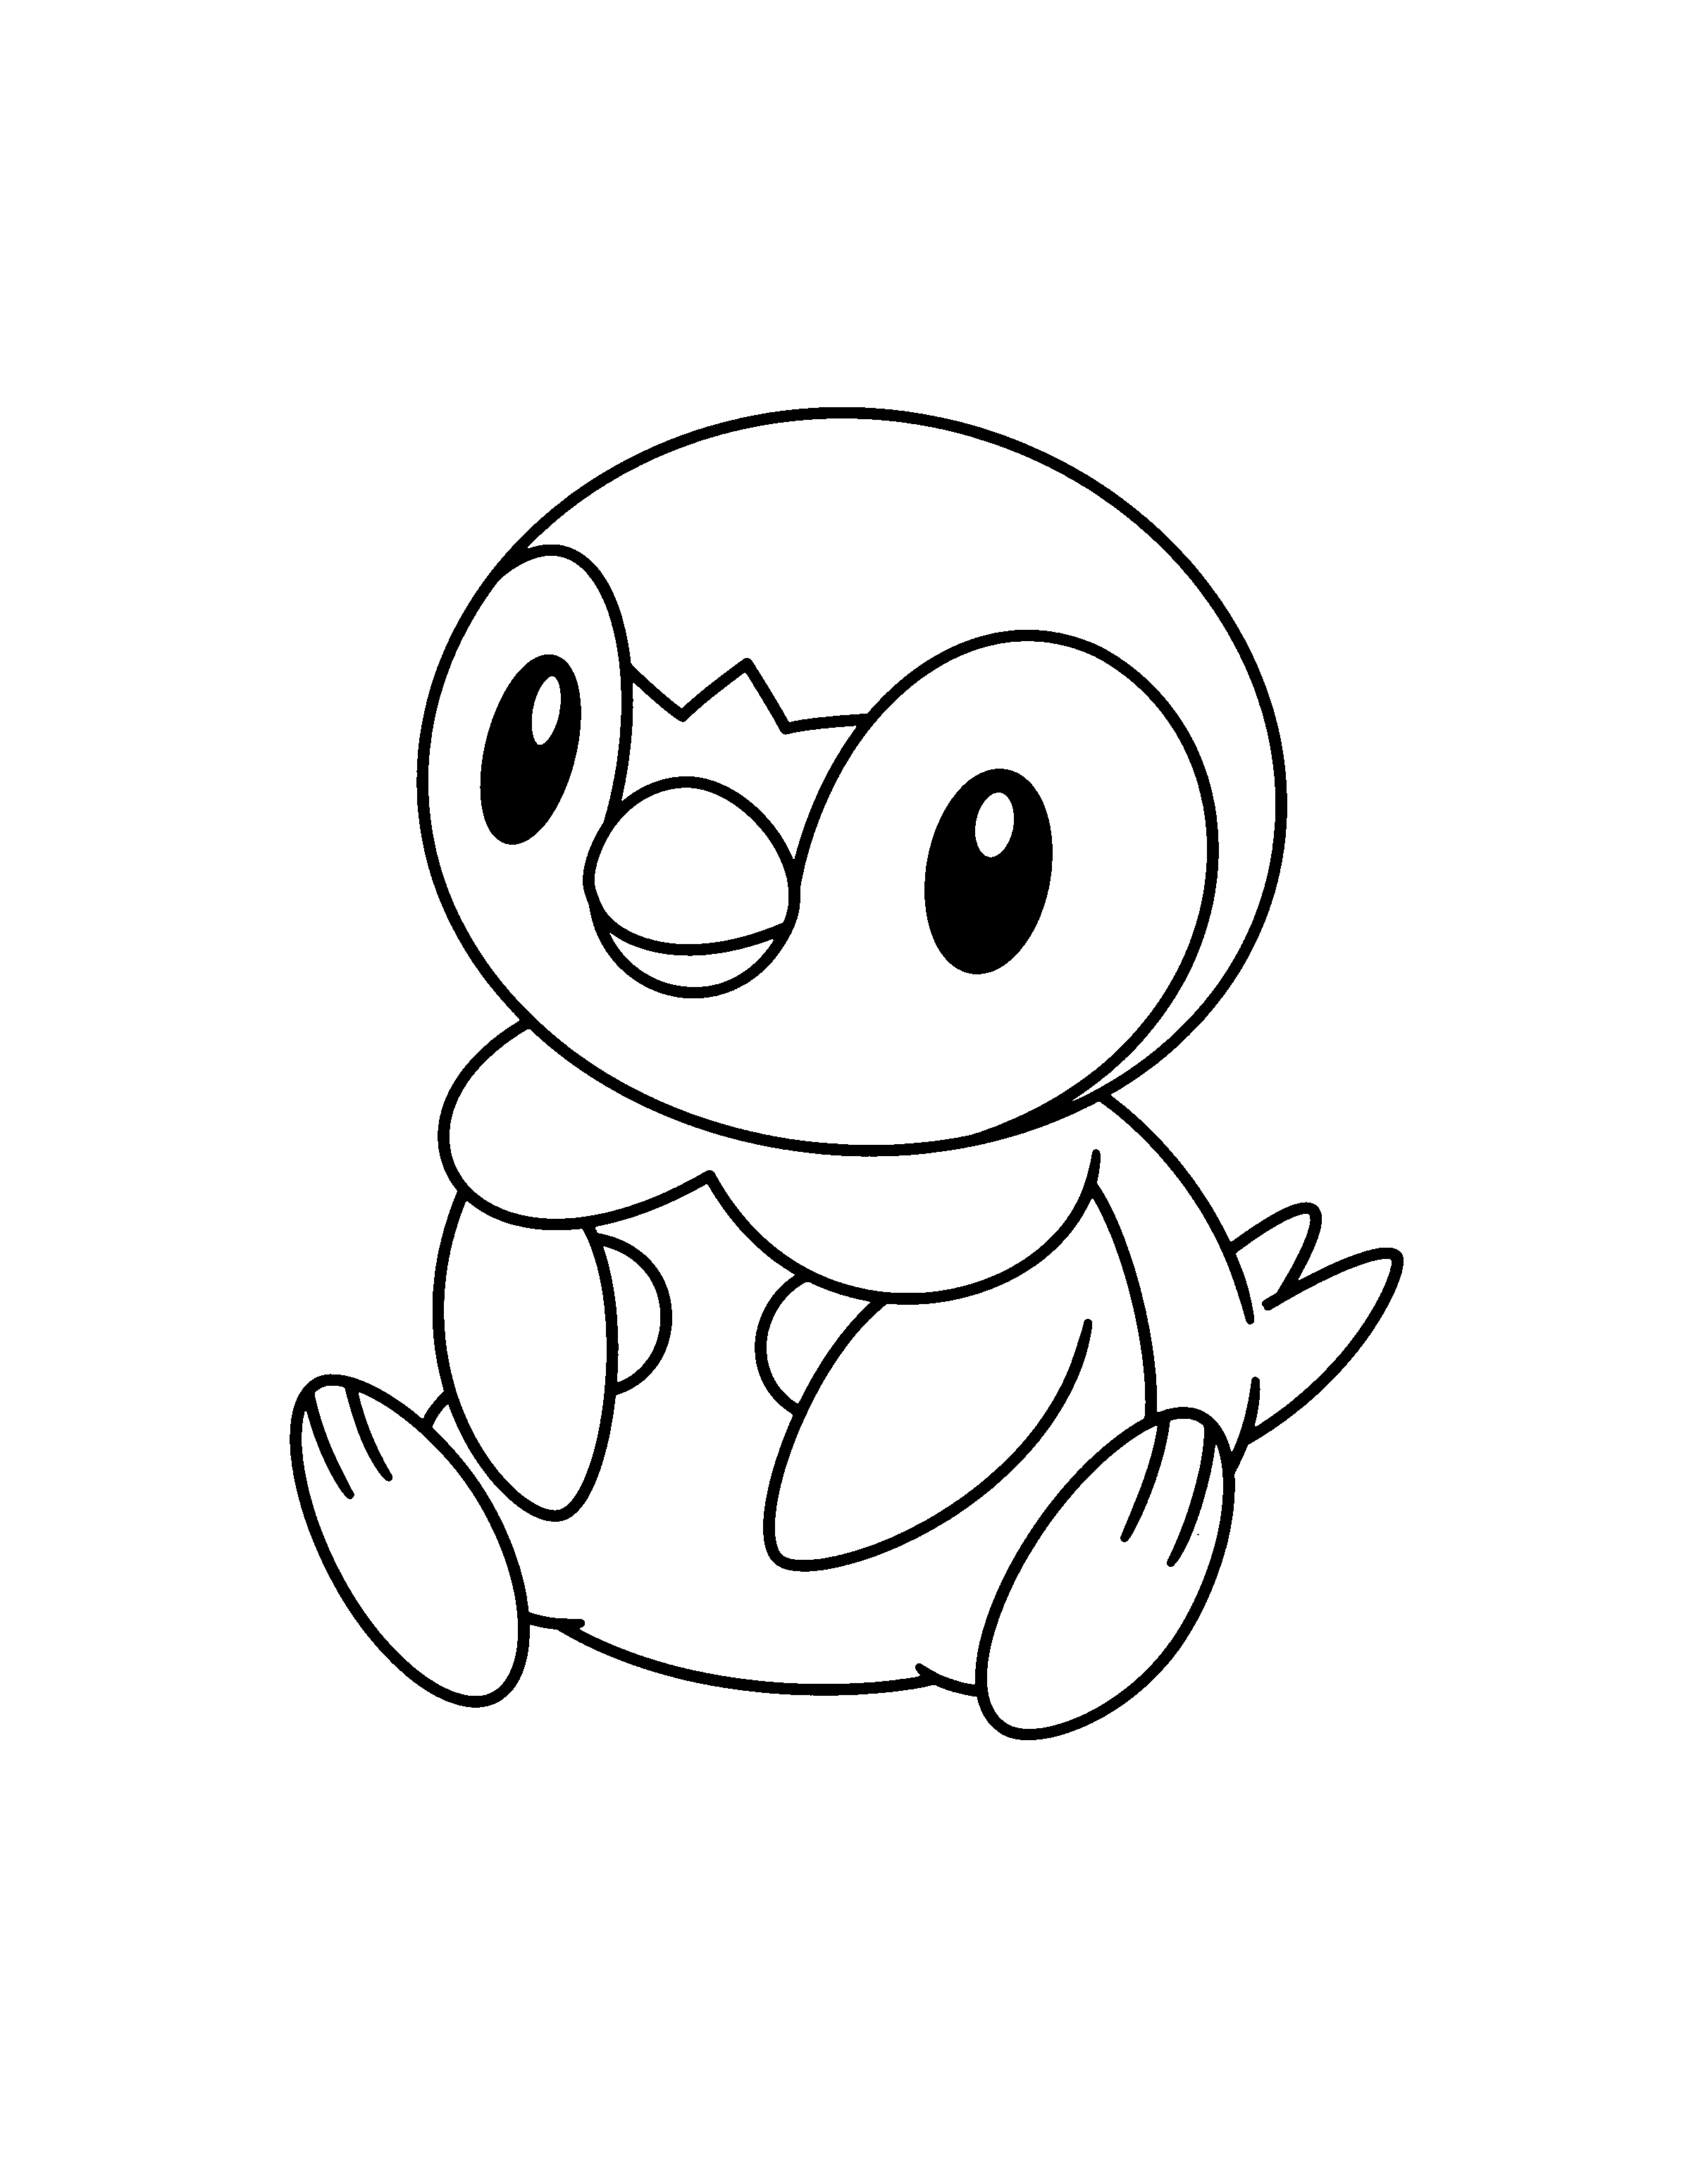 Piplup Coloring Page - Coloring Home